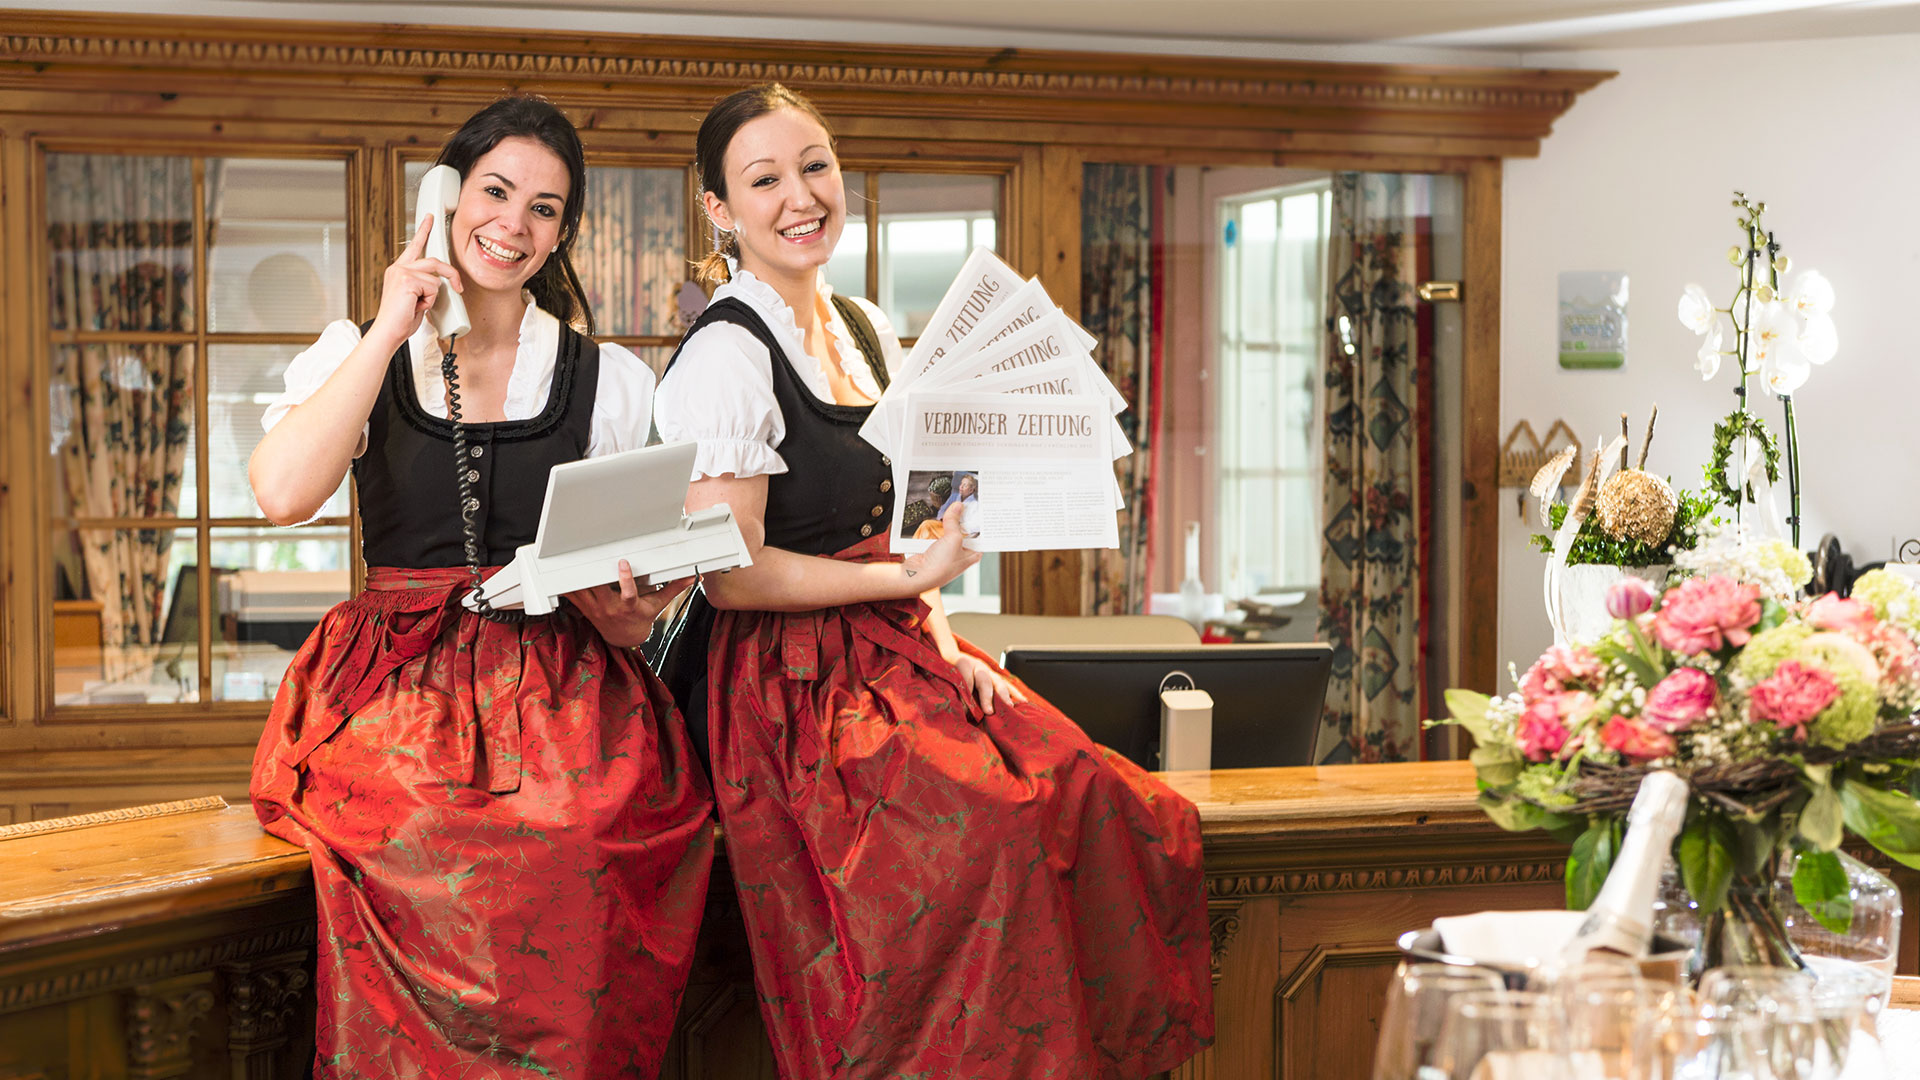 the receptionists at Verdinserhof in traditional southtyrolean dresses